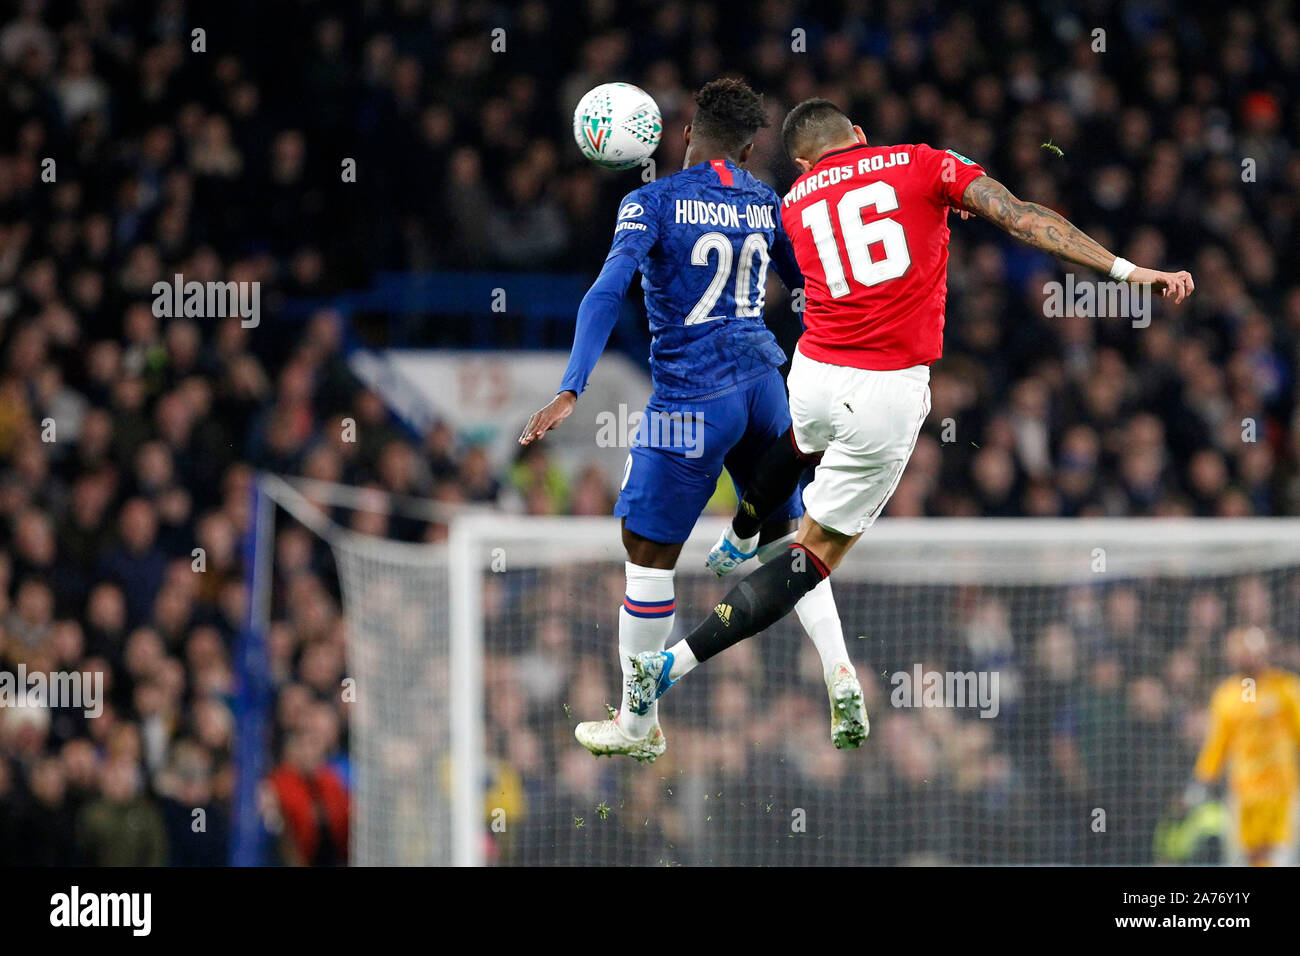 London, UK. 30th Oct, 2019. Callum Hudson-Odoi of Chelsea and Marcos Rojo of Manchester United compete for the ball during the Carabao Cup match between Chelsea and Manchester United at Stamford Bridge, London, England on 30 October 2019. Photo by Carlton Myrie. Credit: PRiME Media Images/Alamy Live News Stock Photo